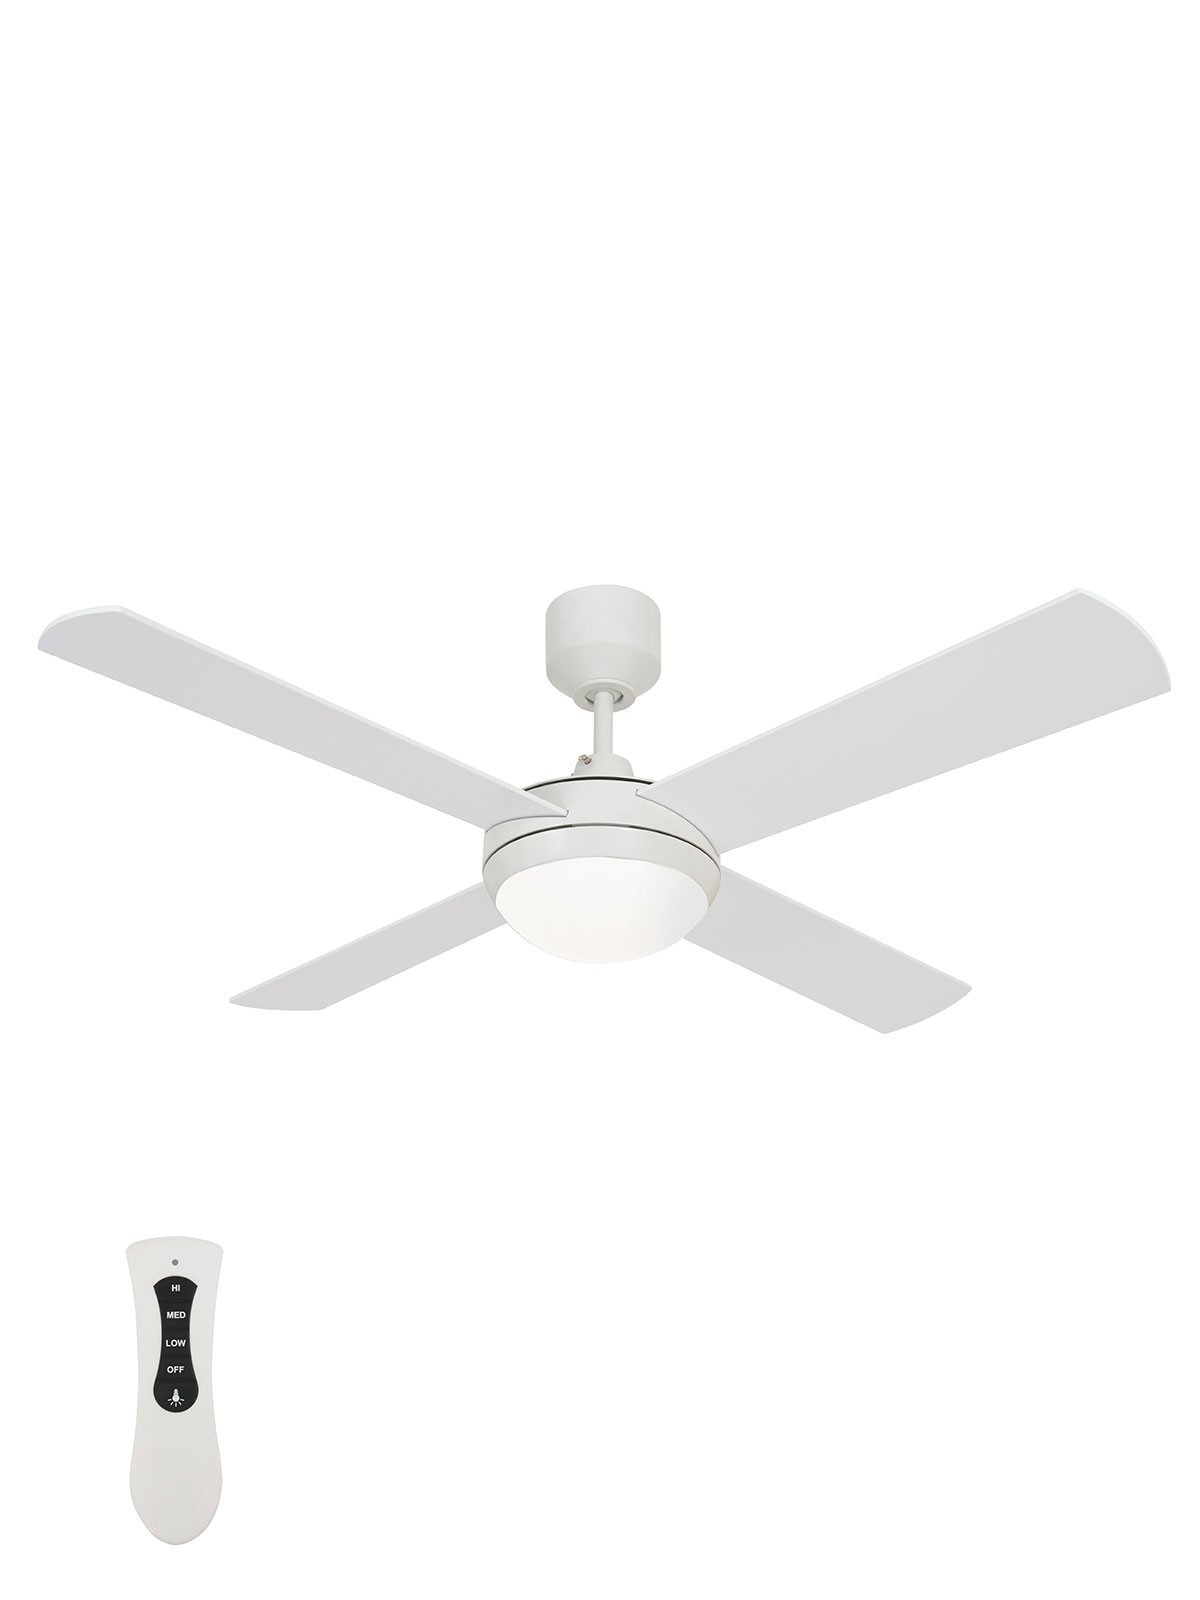 Futura Eco 122cm Fan With Led Light In White intended for dimensions 1200 X 1600